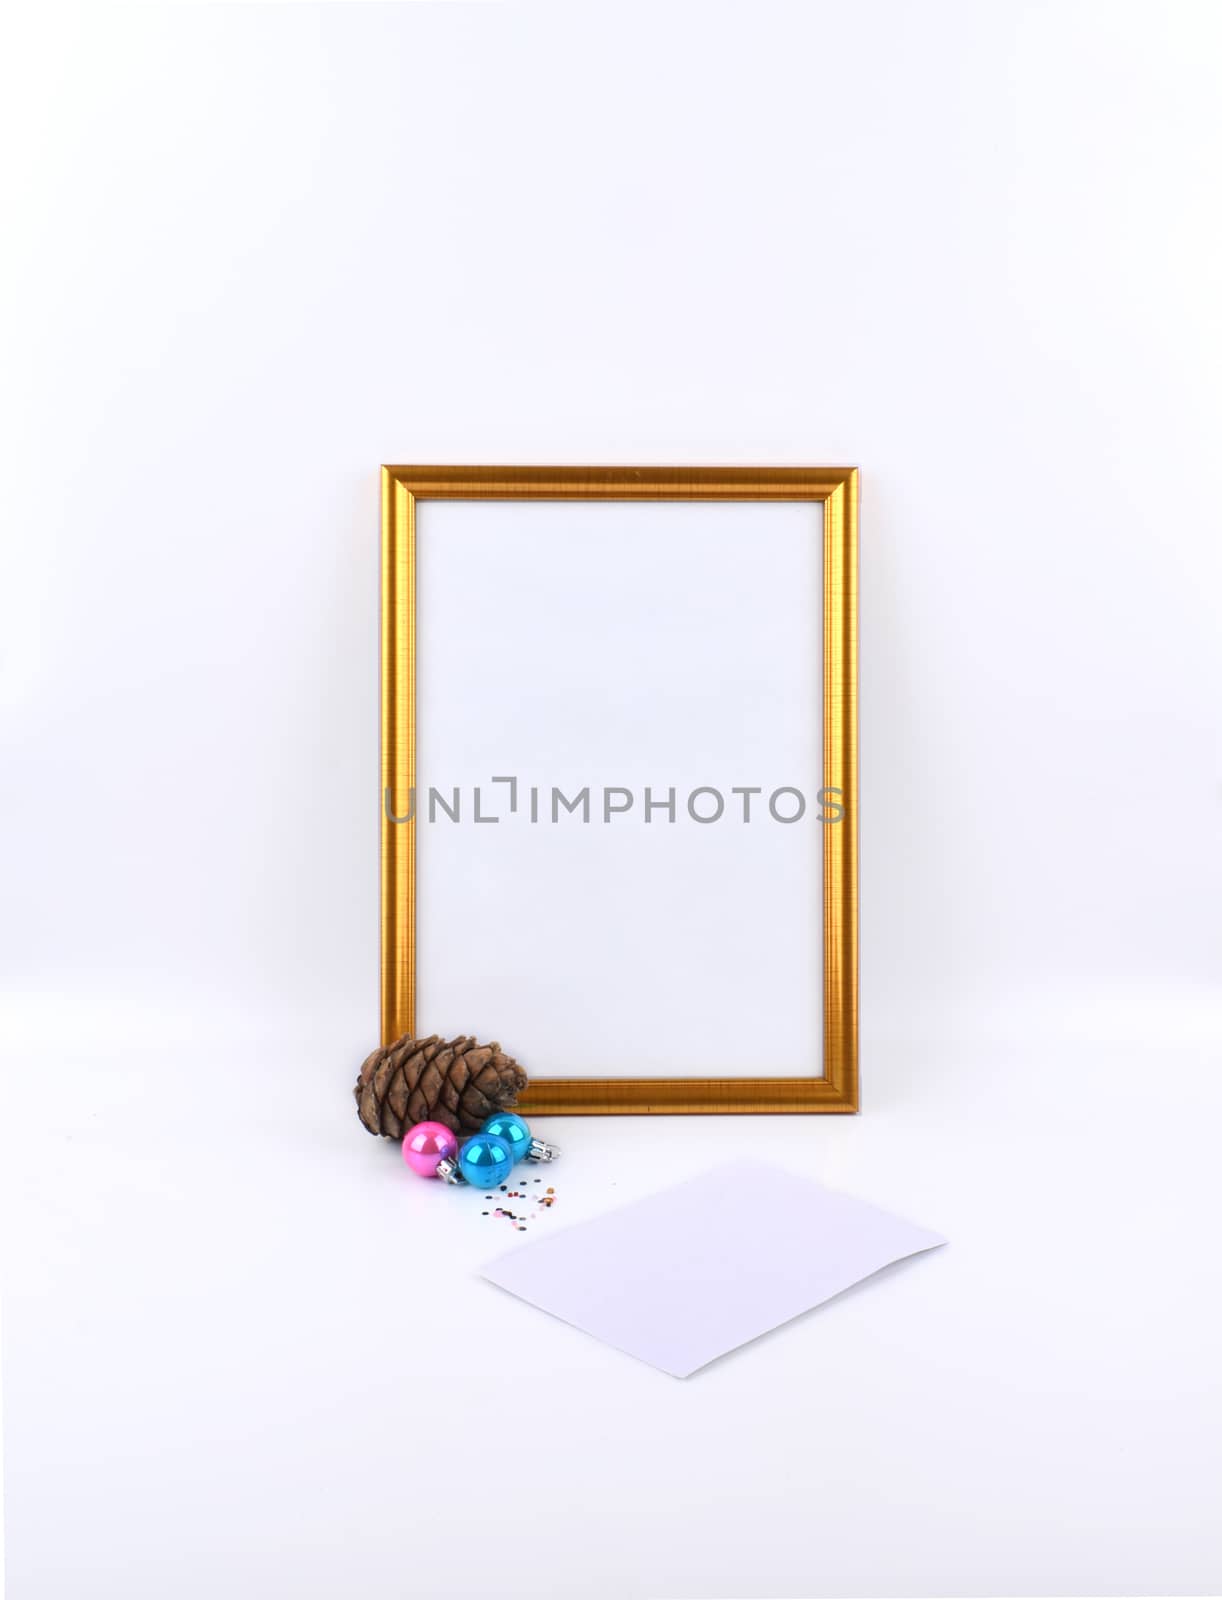 #116. Mock up objects isolated on a white background with copy space, front view. 